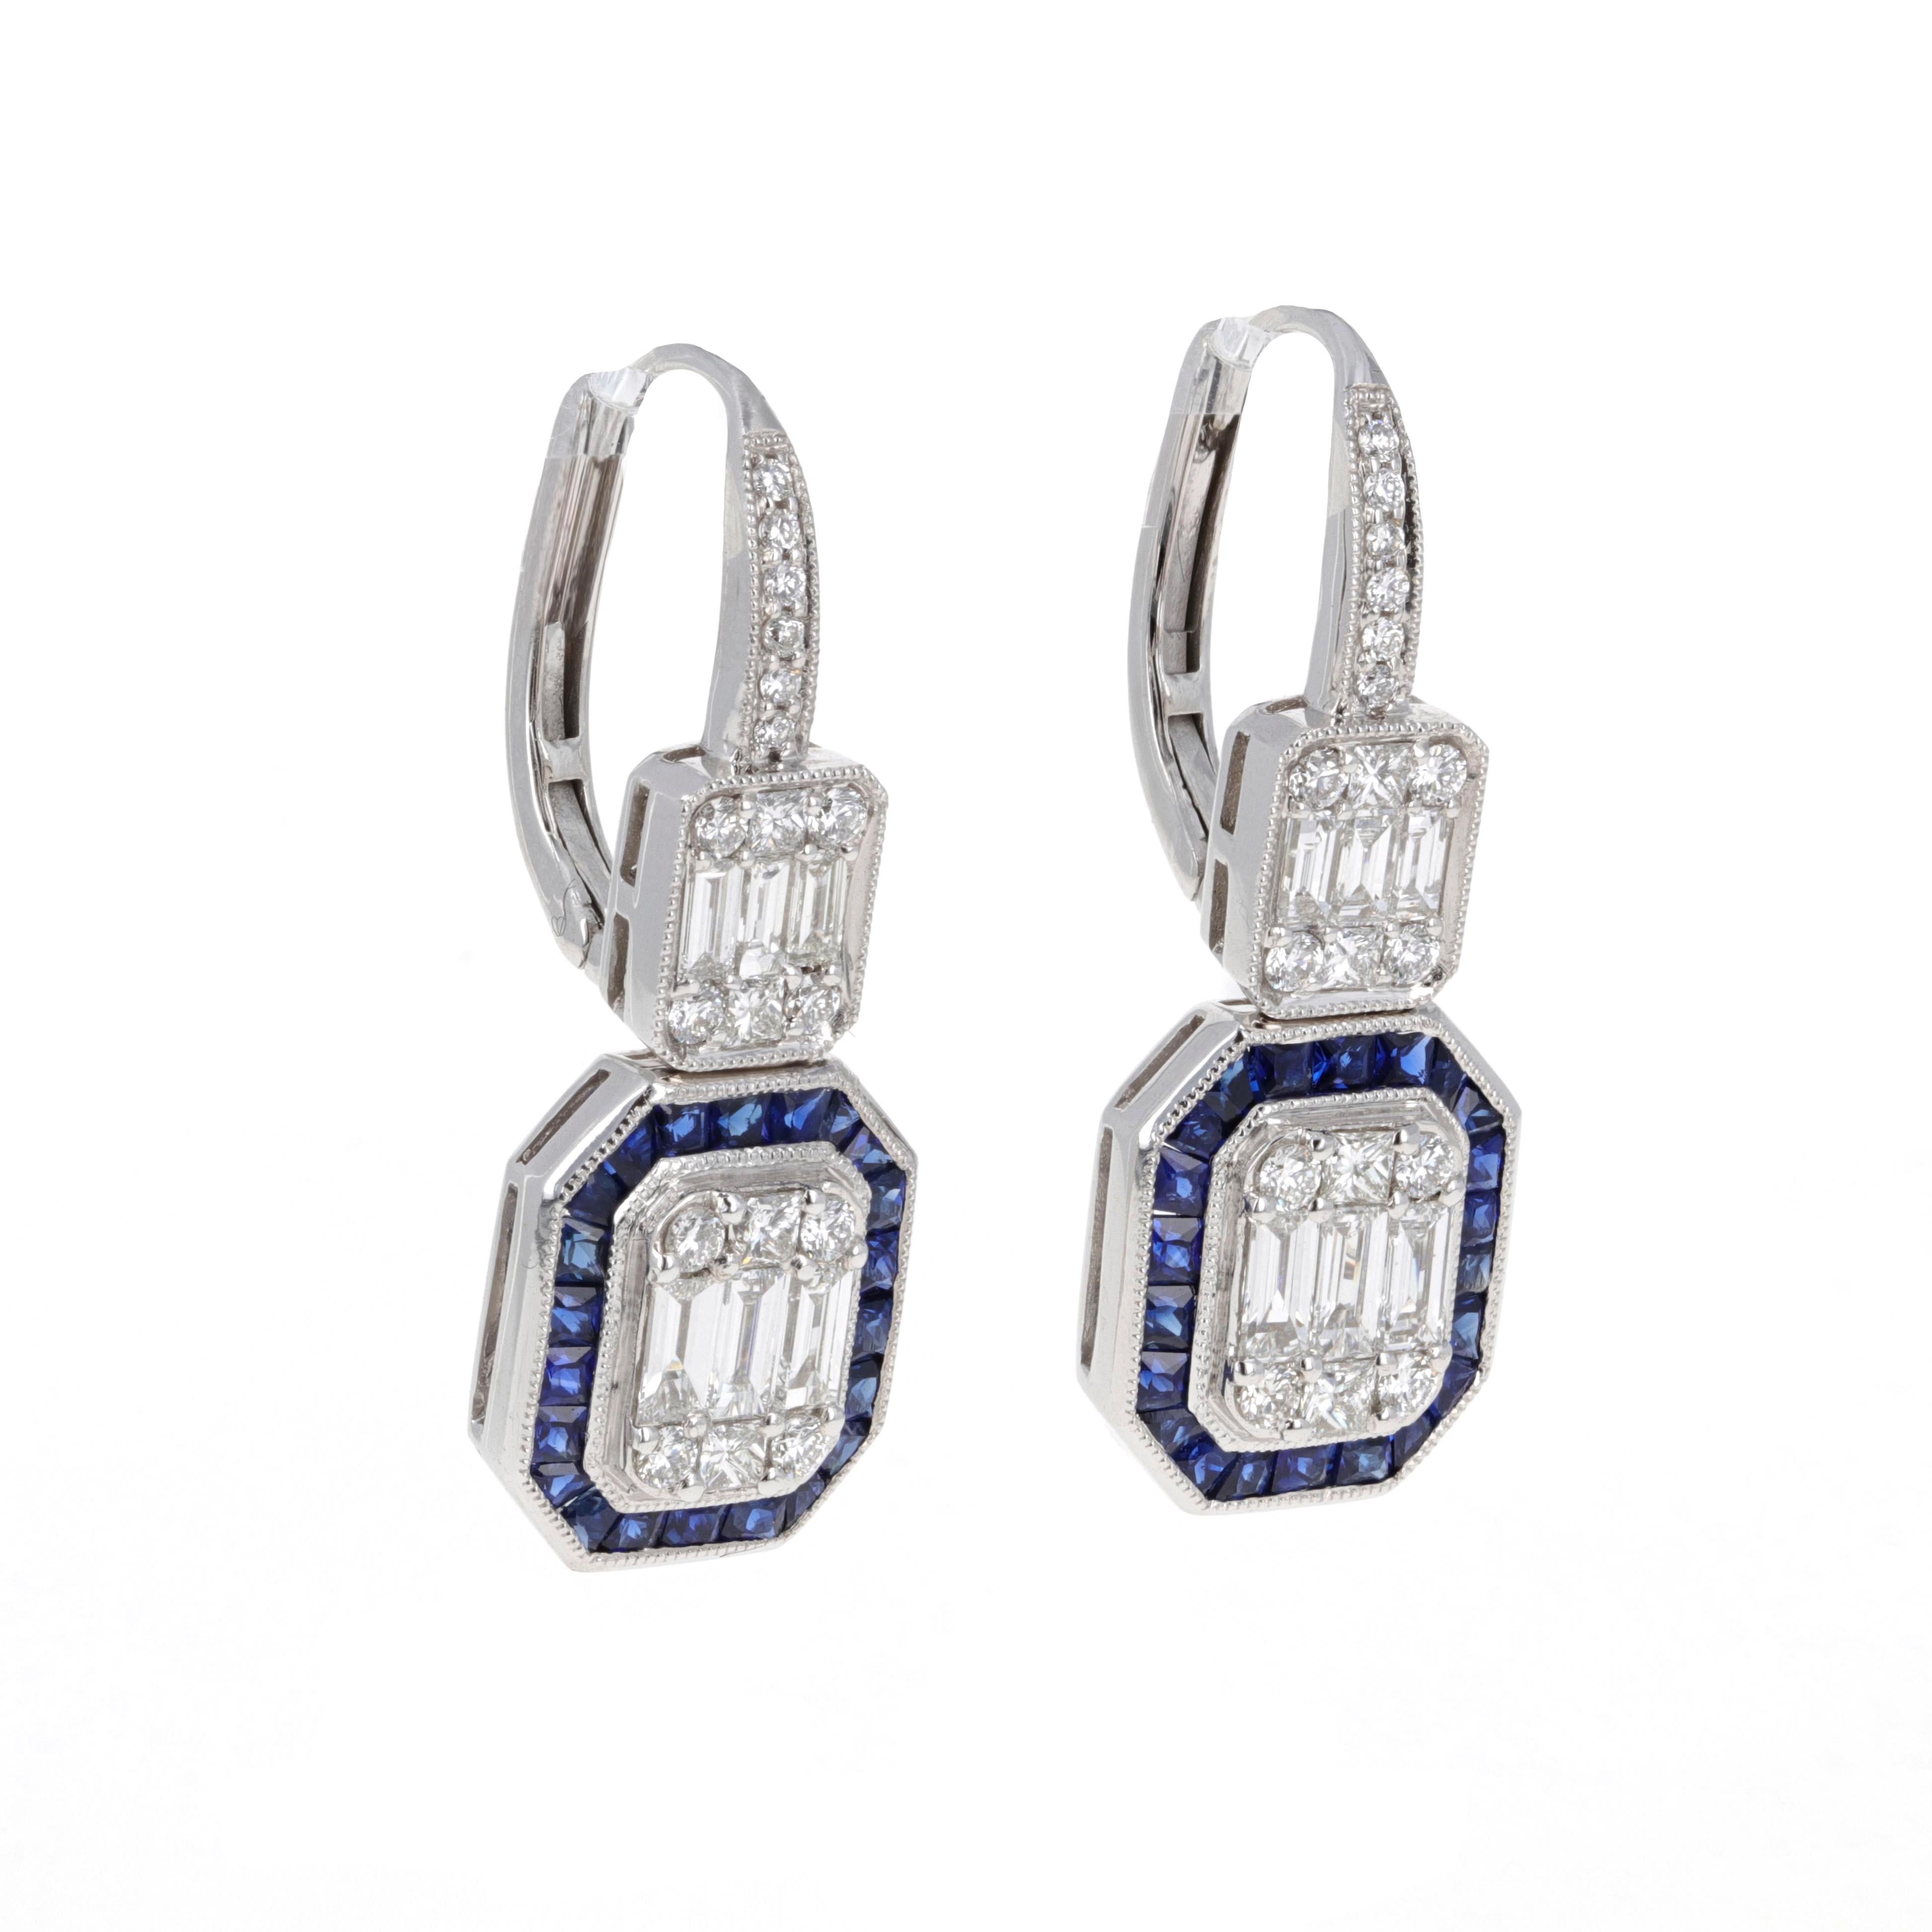 Hand made 18 karat white gold diamond and sapphire drop dangle earrings. These earrings are 